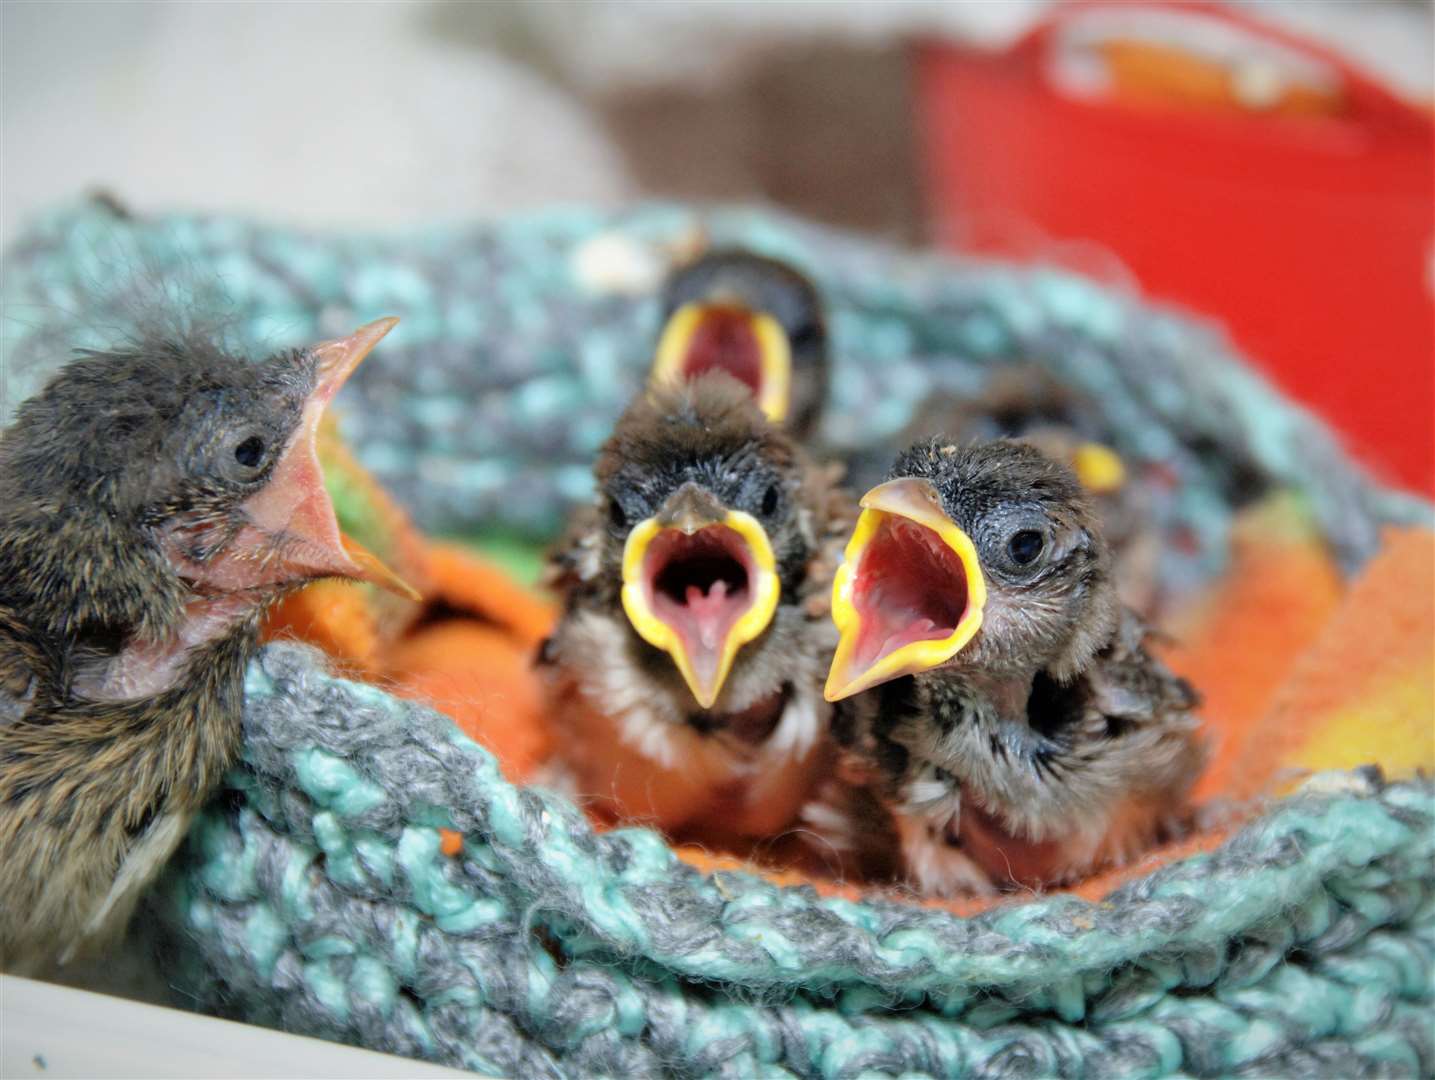 Baby birds rescued by the charity.